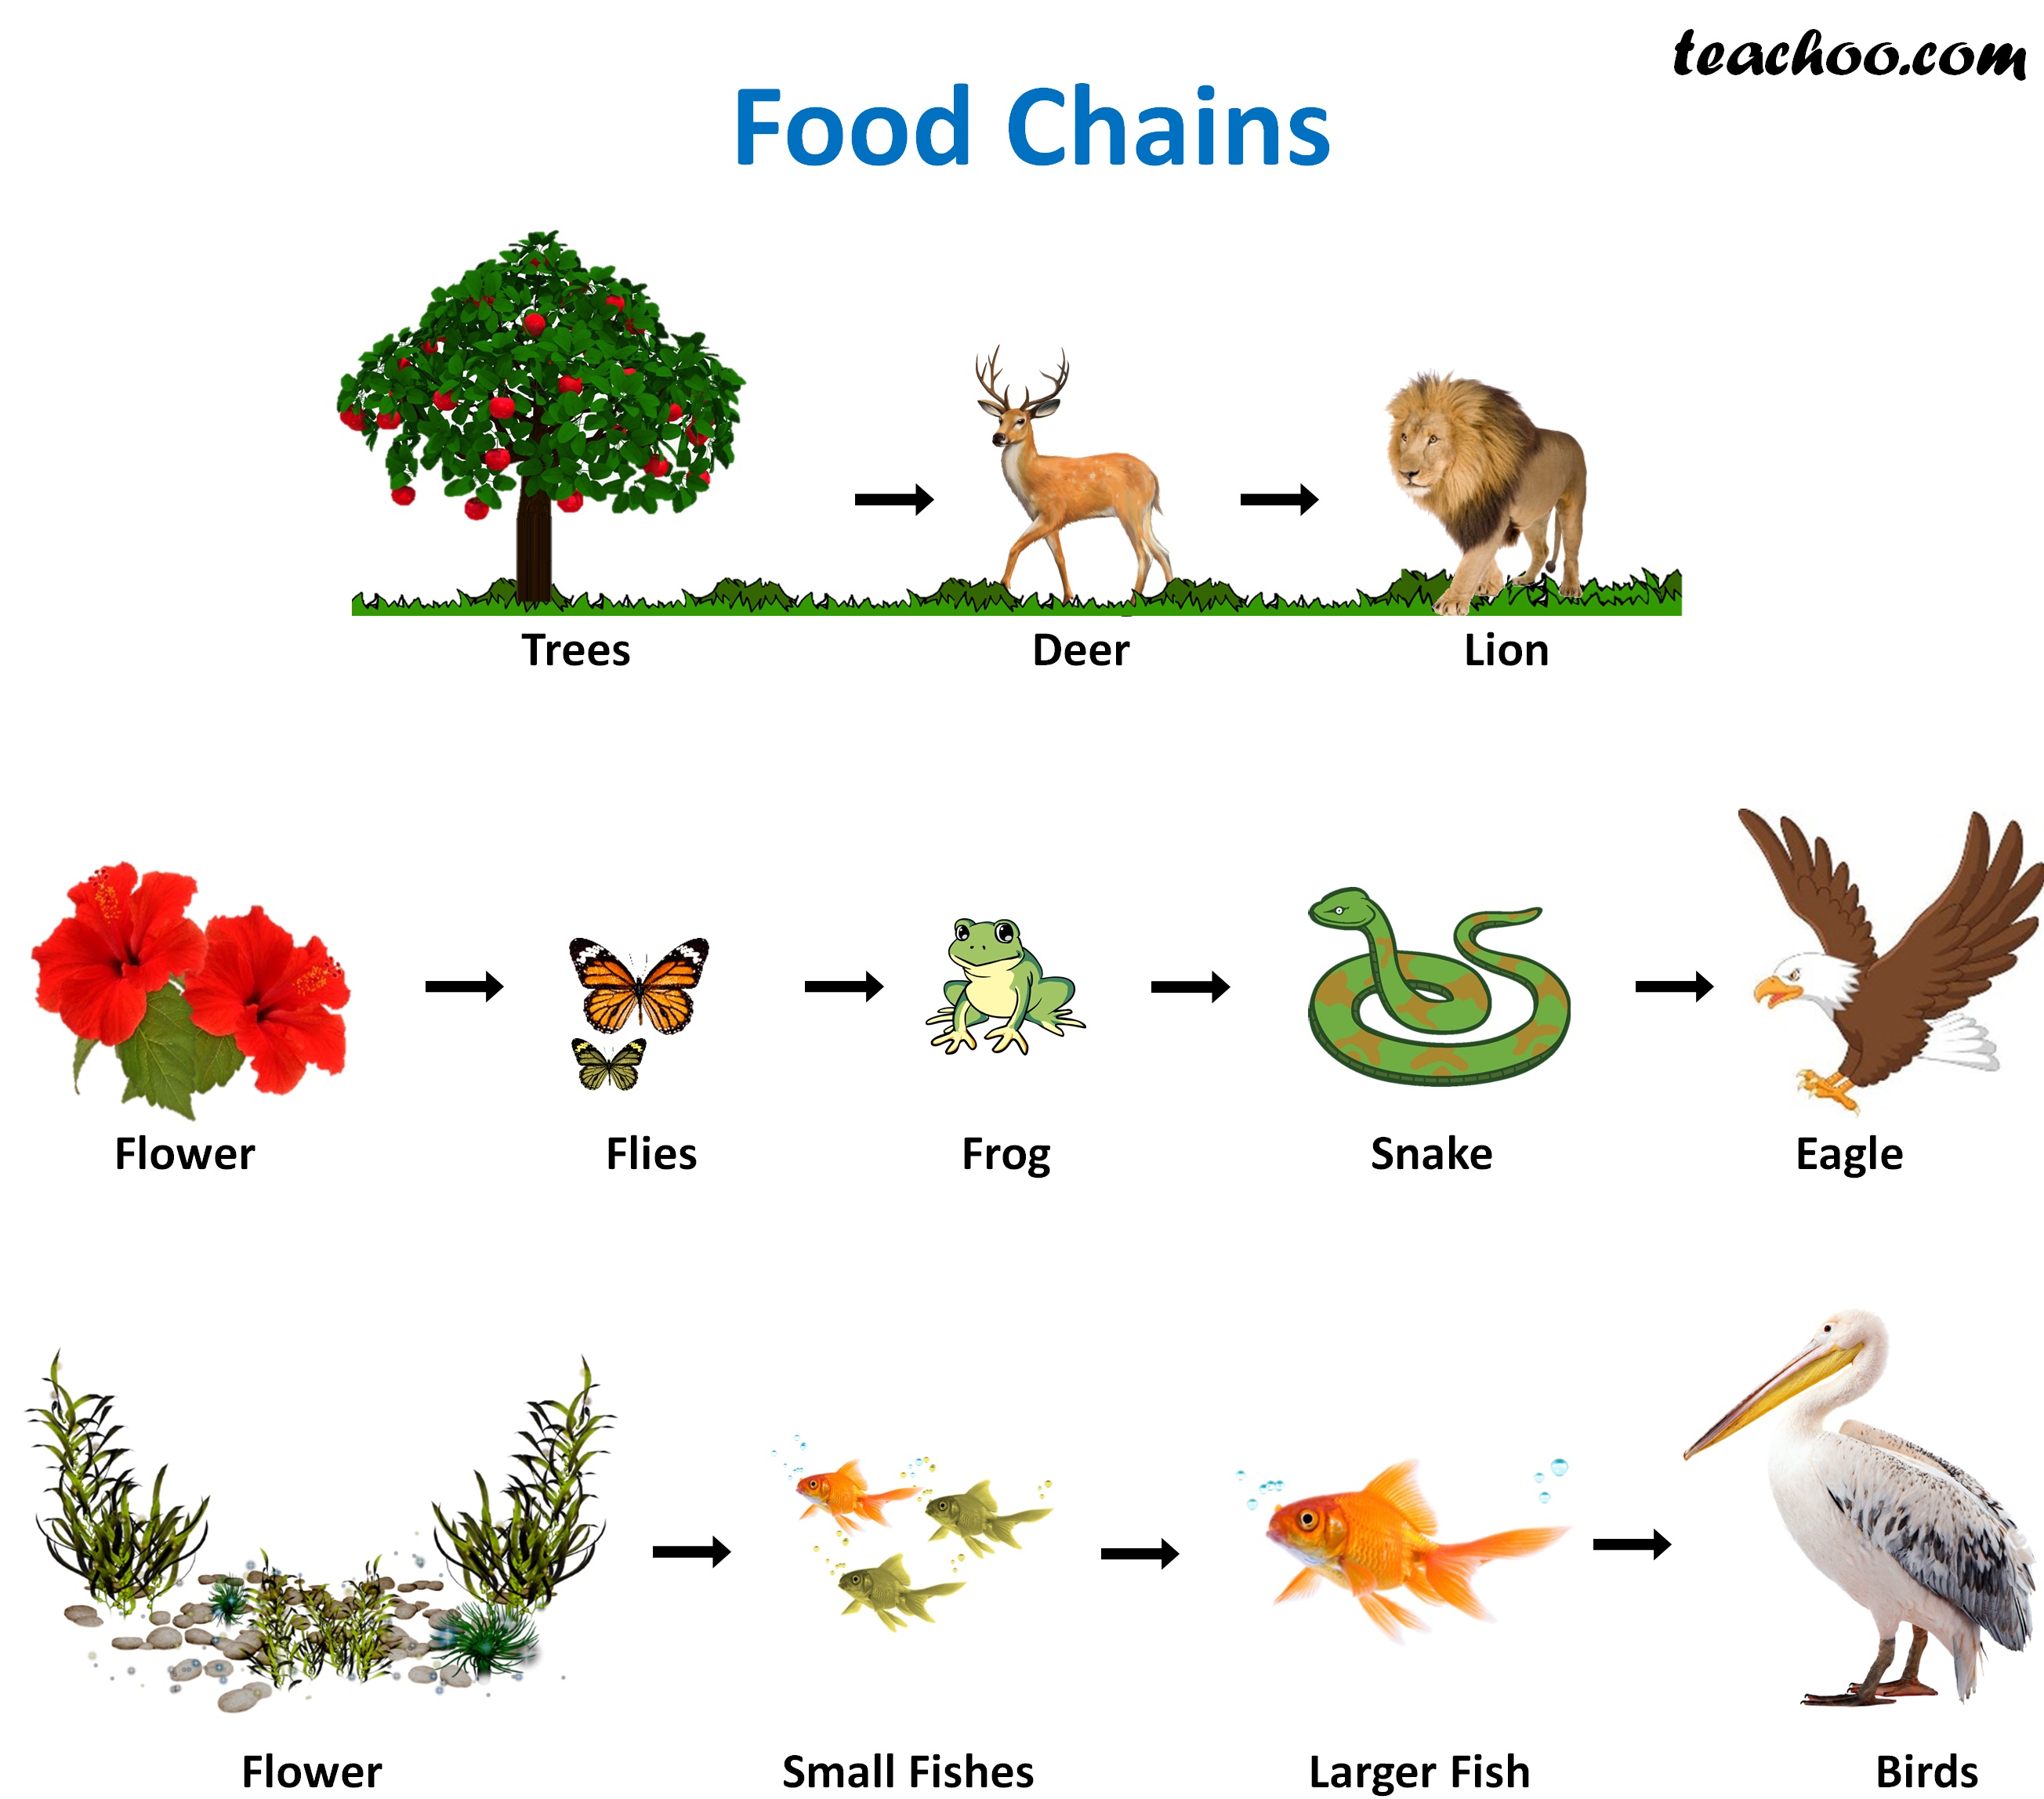 graphical representation of food chain